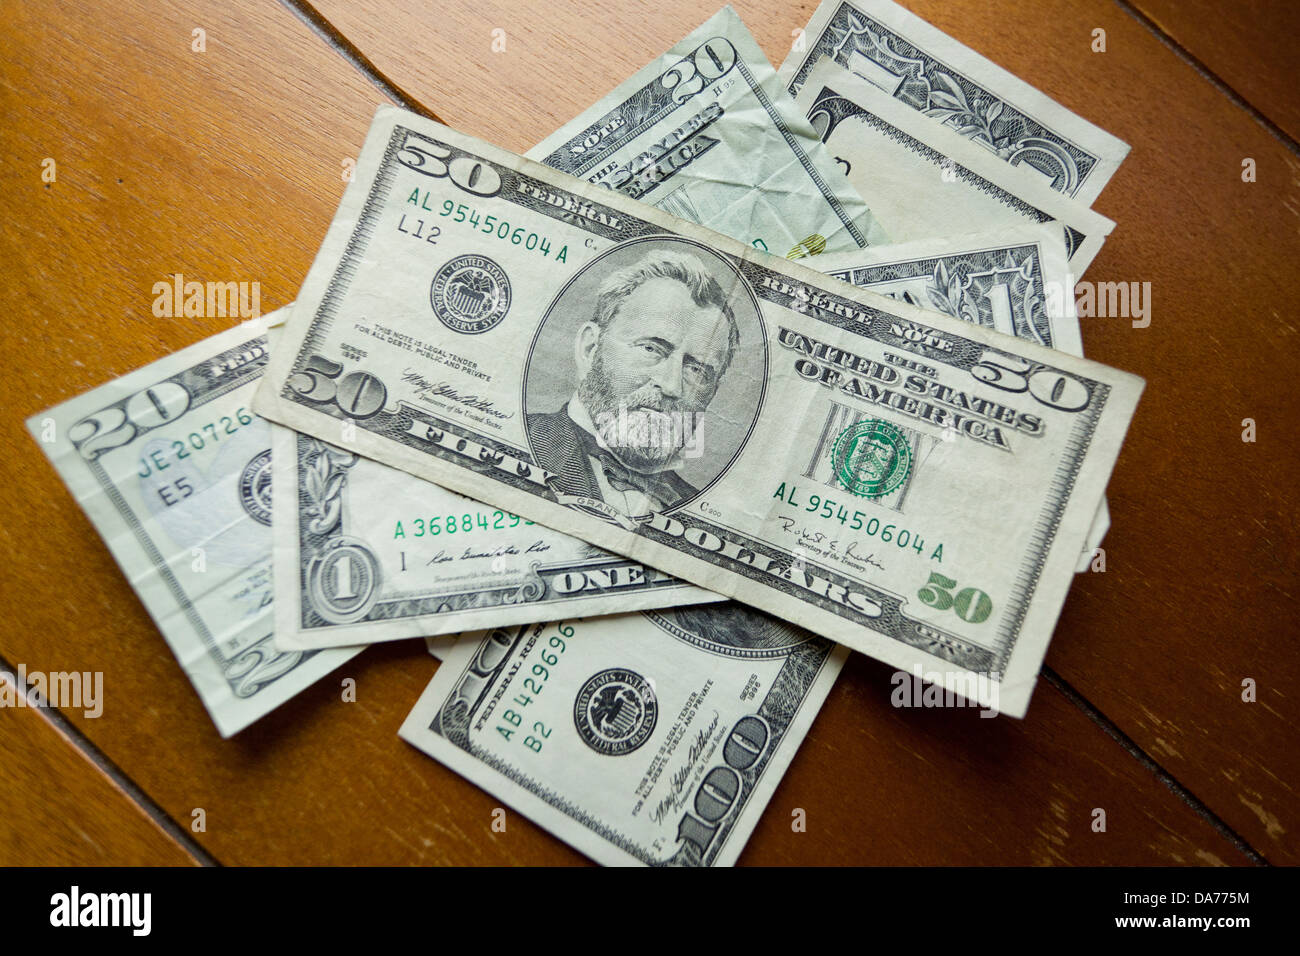 Chash money on a table stock photo. Image of table, faith - 67394560